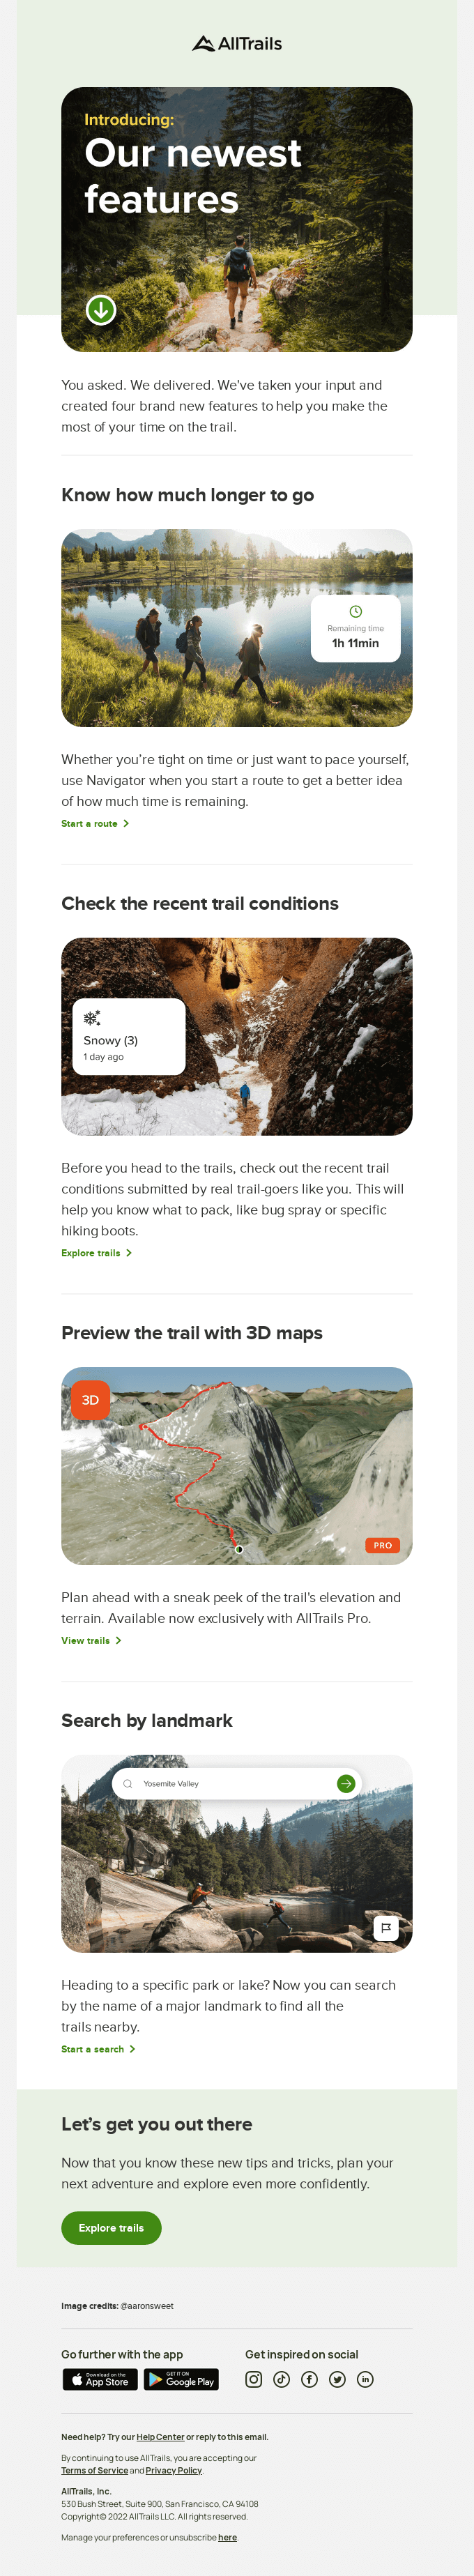 We’ve added new features to make trail time even better!